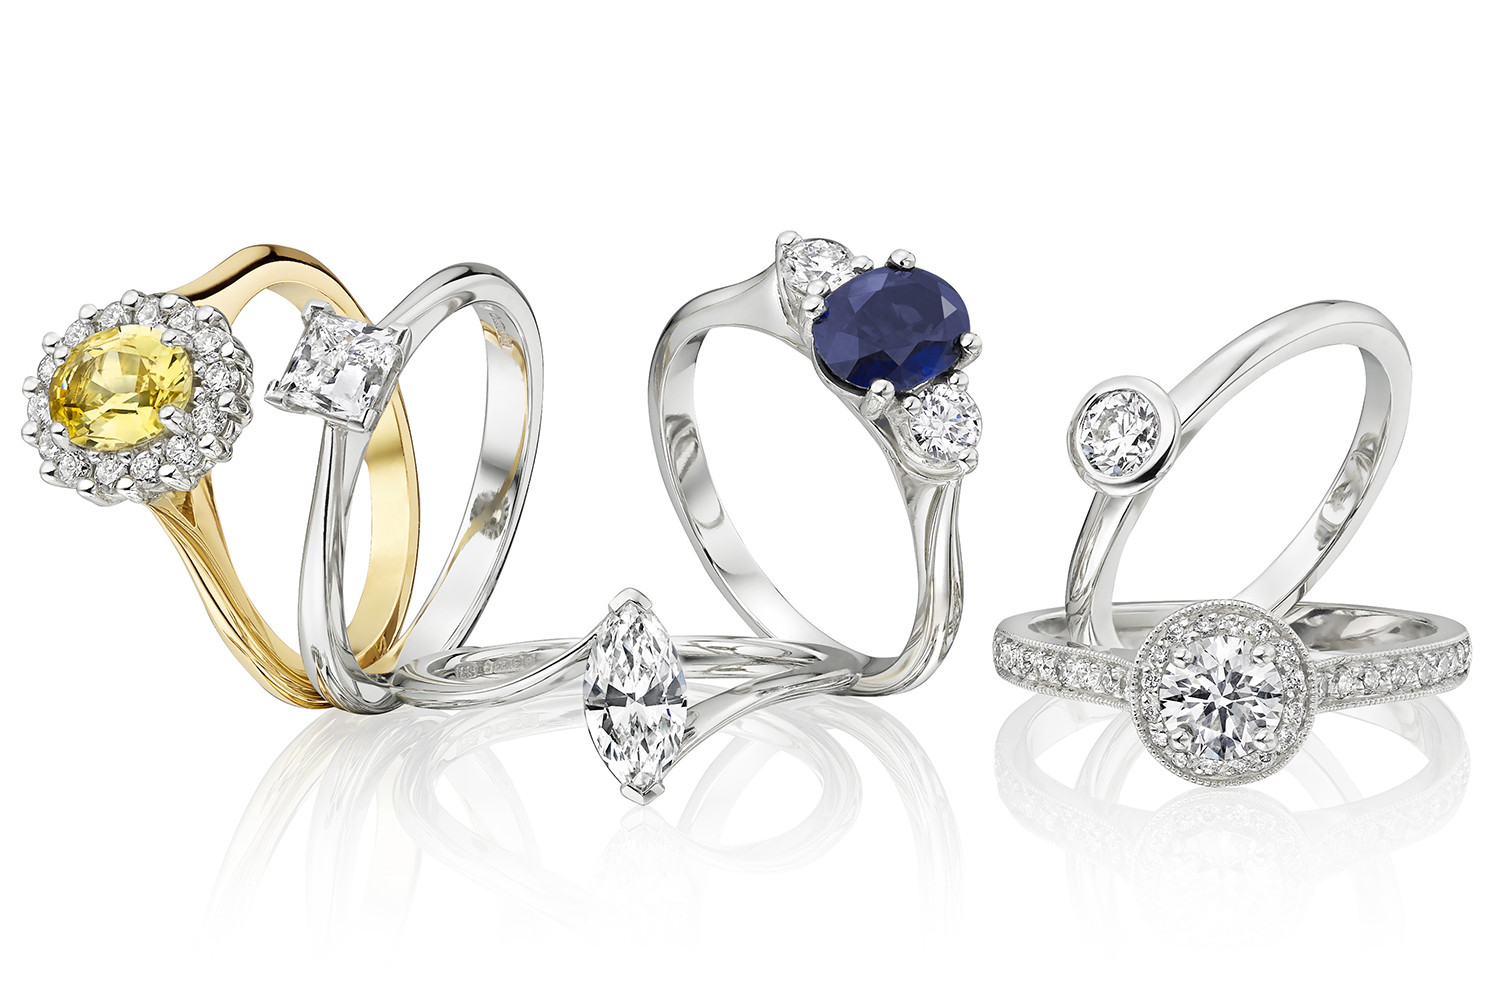 Ethical Wedding Rings
 Ethical Wedding engagement rings from Ingle & Rhode